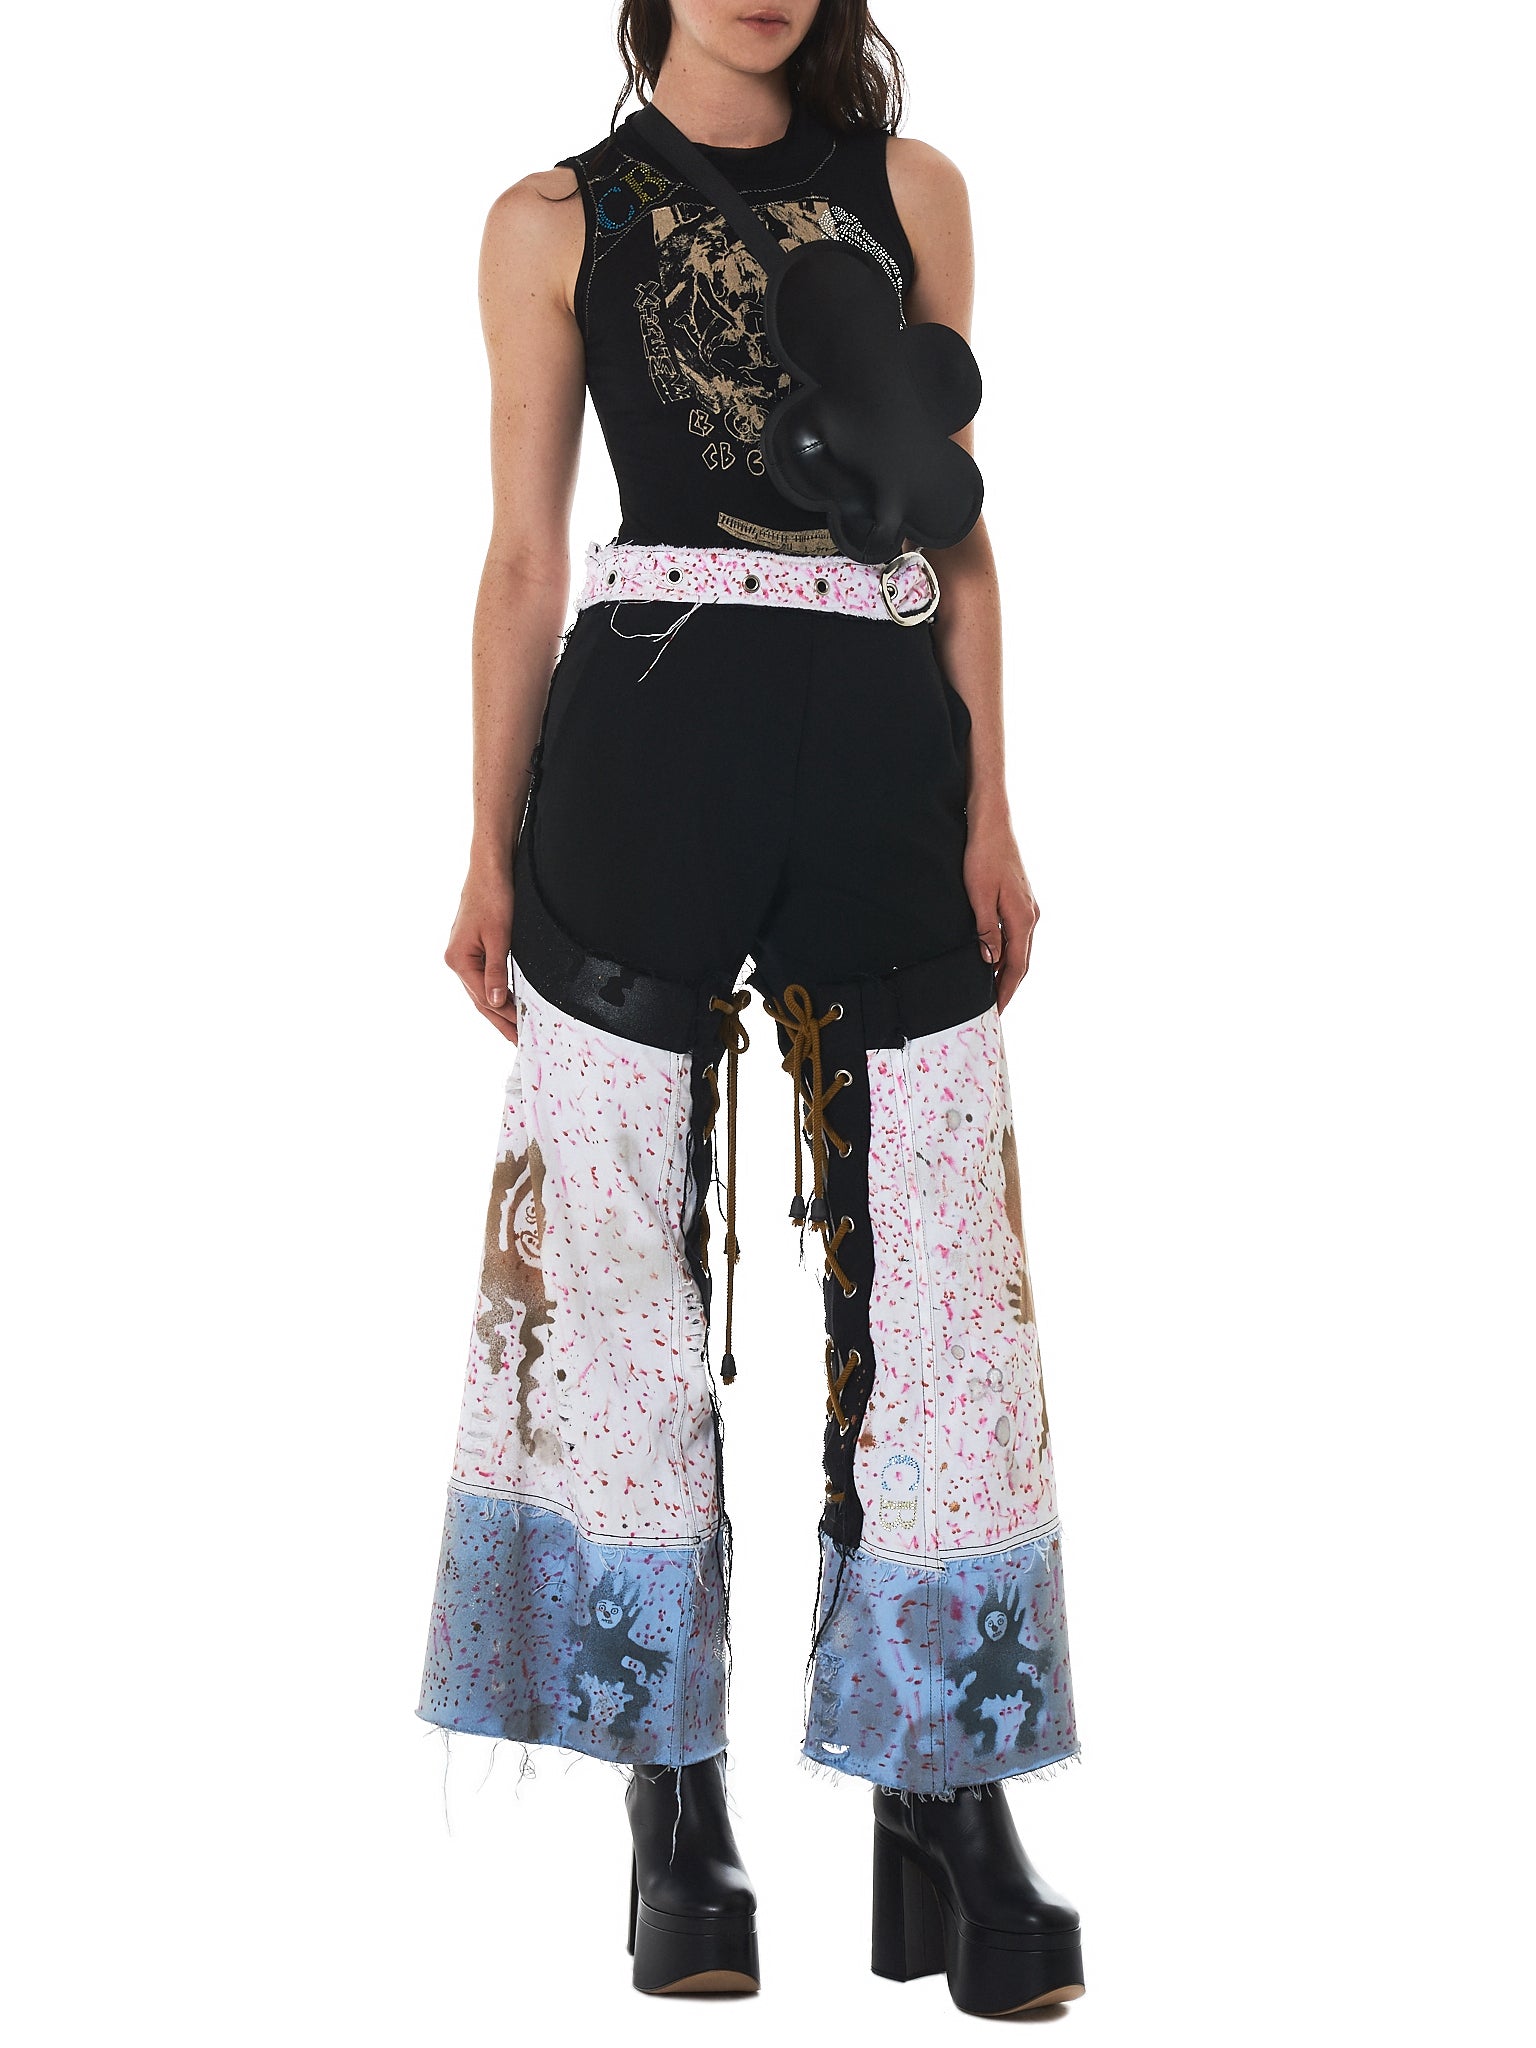 Claire Barrow Hand-Painted Denim - Hlorenzo Style